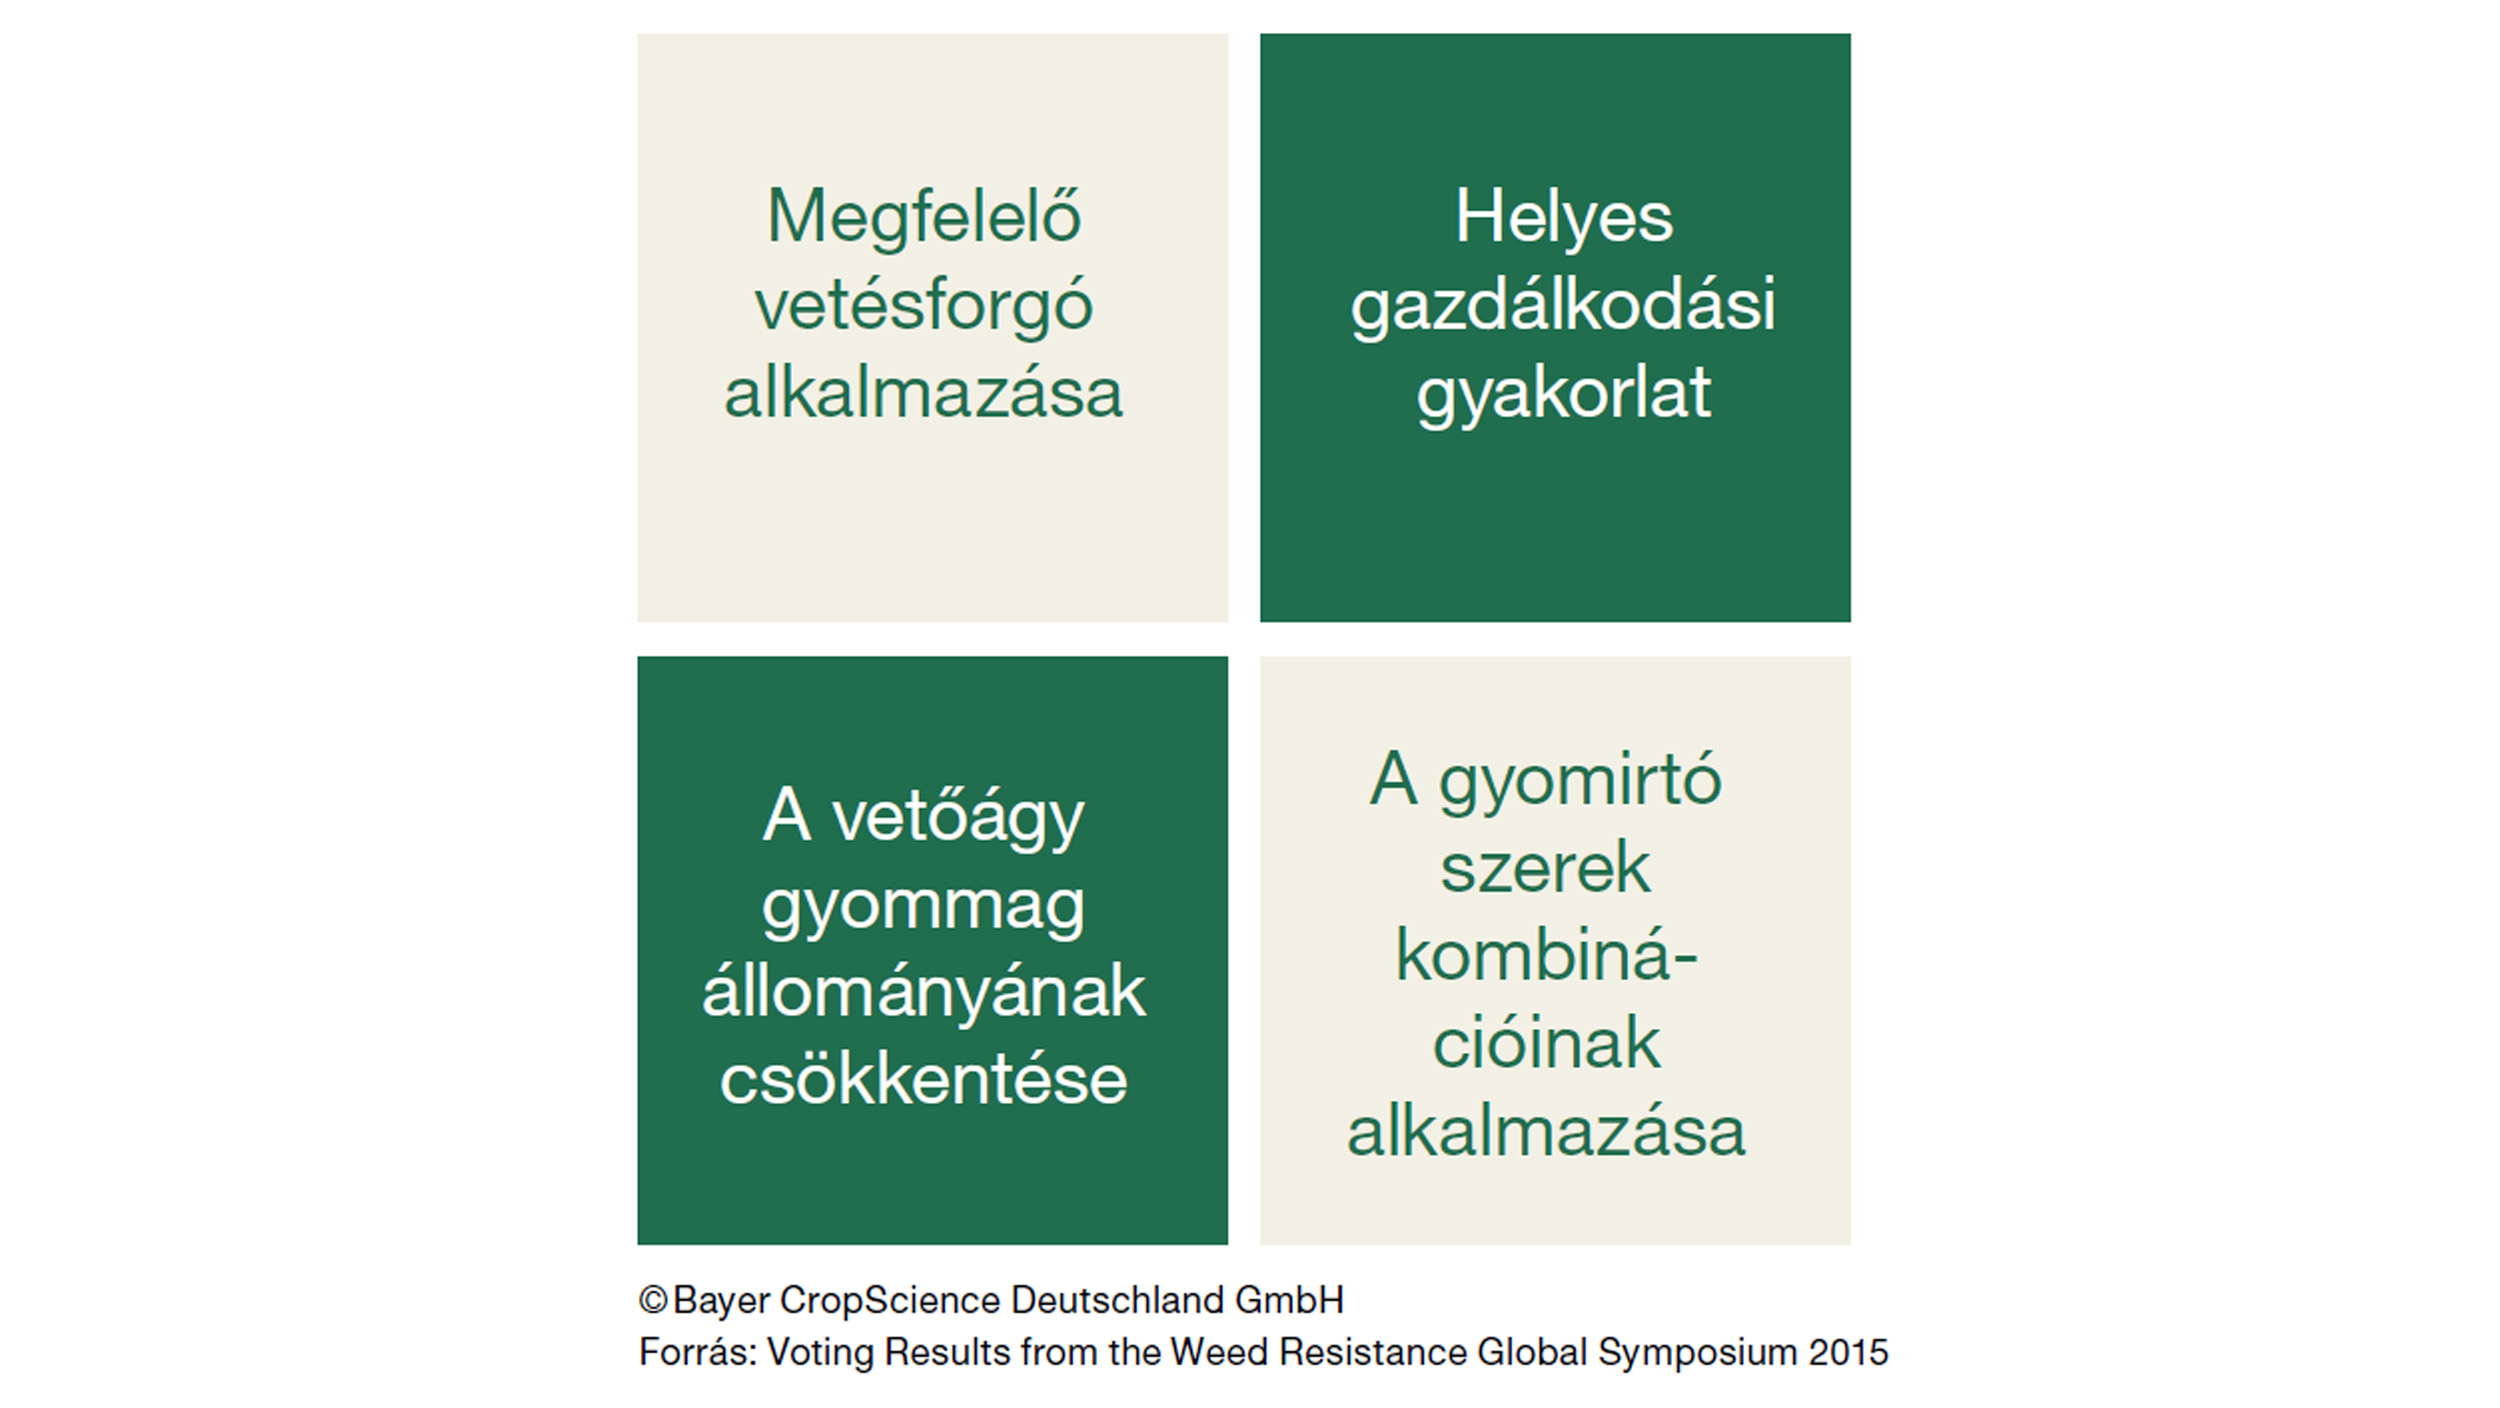 Adapted according to Bayer Crop Science Deutschland GmbH Source: Voting results from the Weed Resistance Global Symposium 2015